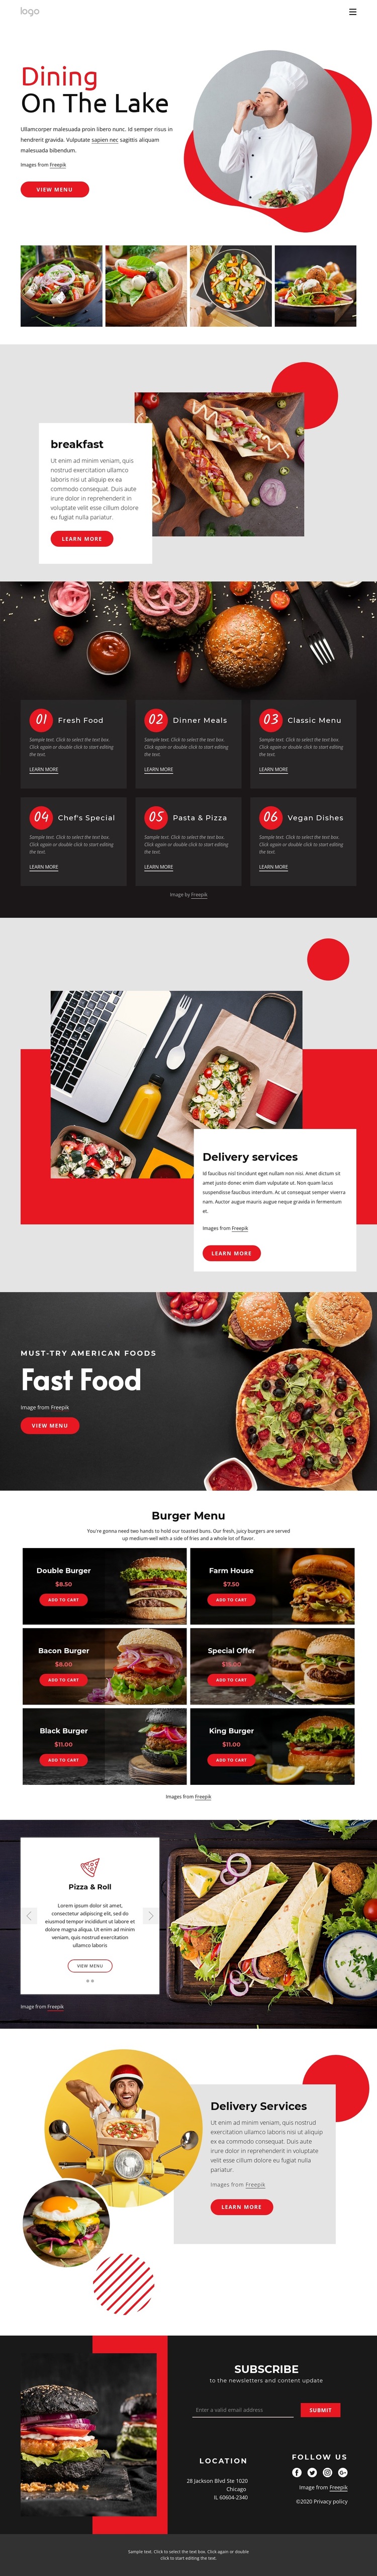 Dining on the lake HTML5 Template